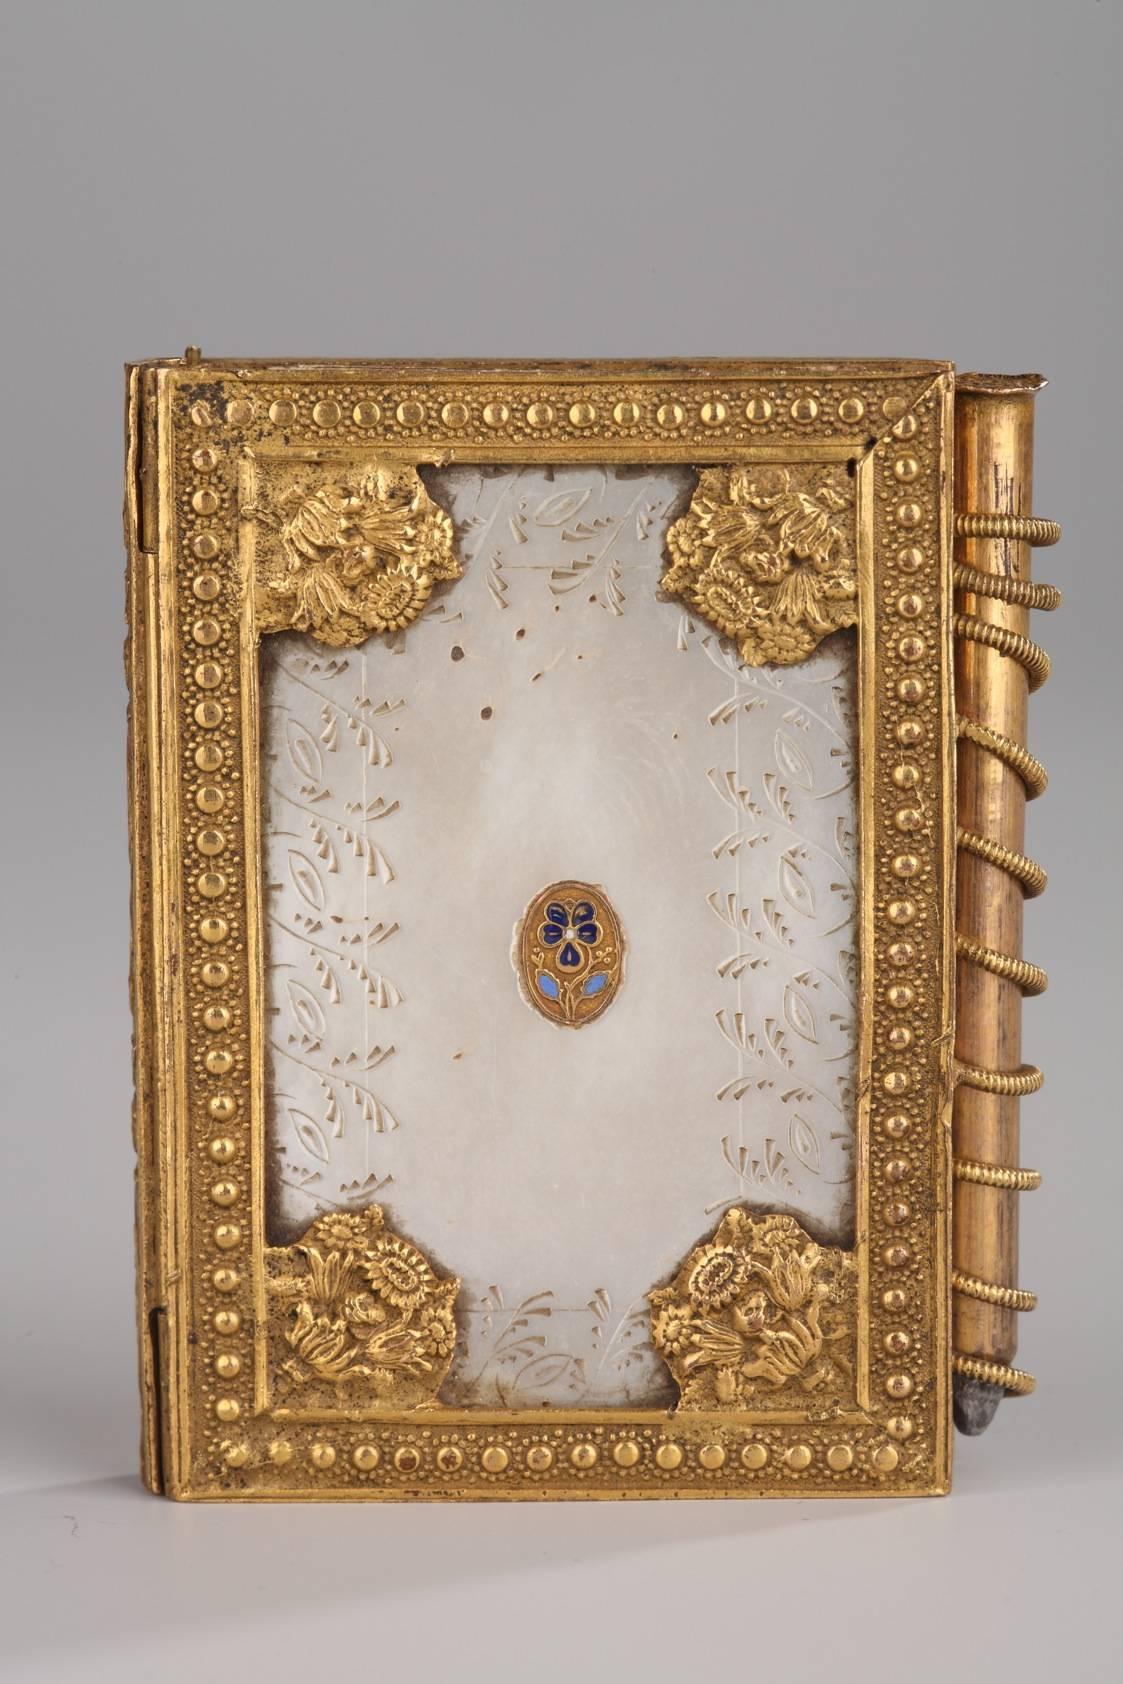 Charles X dance card in mother of pearl with gilt bronze mounts. It is engraved with plants, flowery interlacing, and bouquets of flowers. An enameled pansy adorns the cover, a typical motif of Palais-Royal objects. It has its original paper and